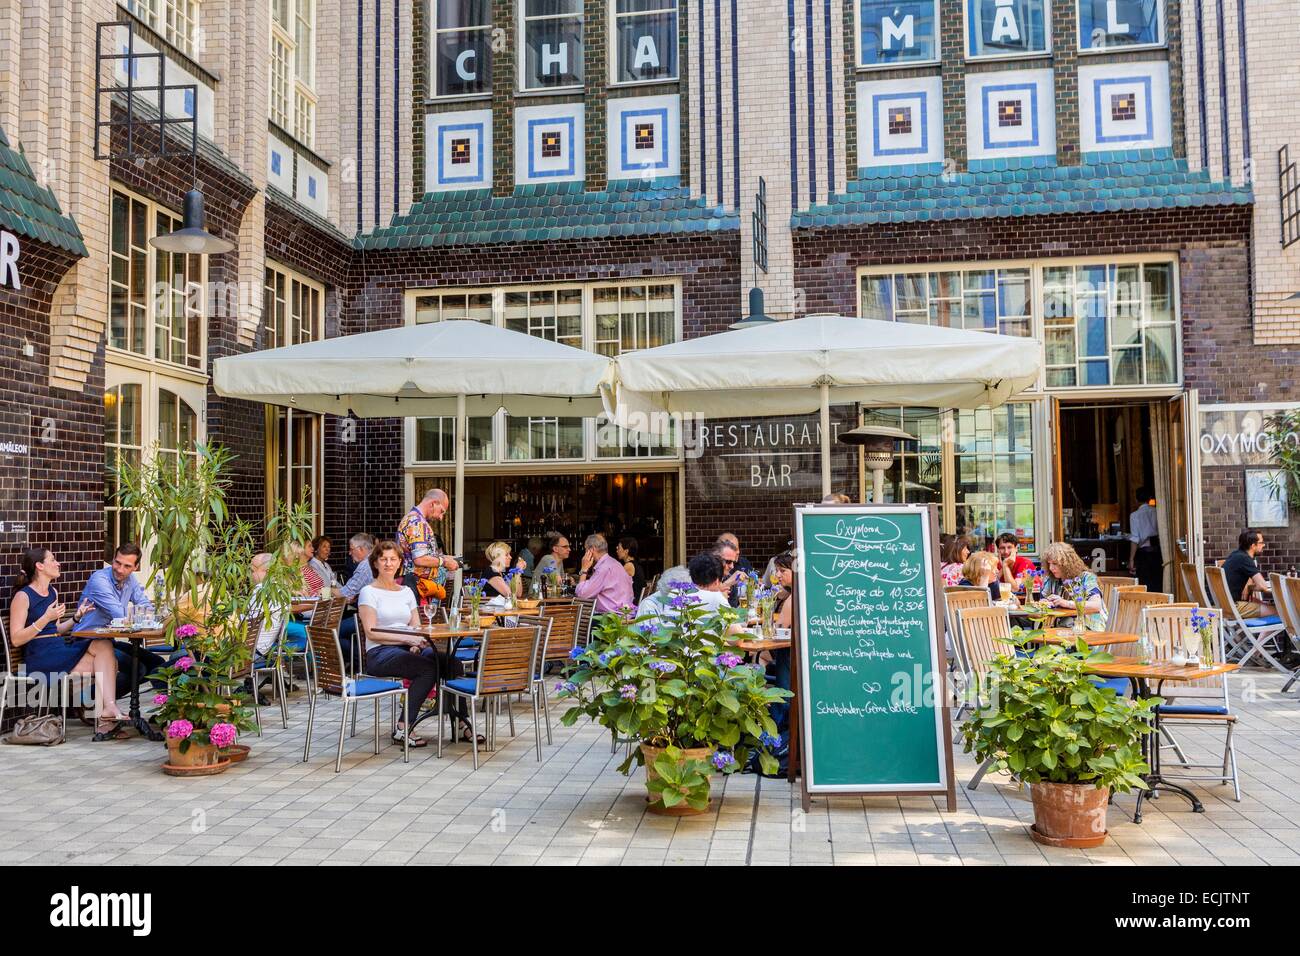 Germany, Berlin, East Berlin, Scheunenviertel district, Hackescher Höfe, first courtyard (HOF 1) designed in the Art Nouveau style by the German artist August Endel 1907 Oxymoron bar with Chamäleon Theater above Stock Photo